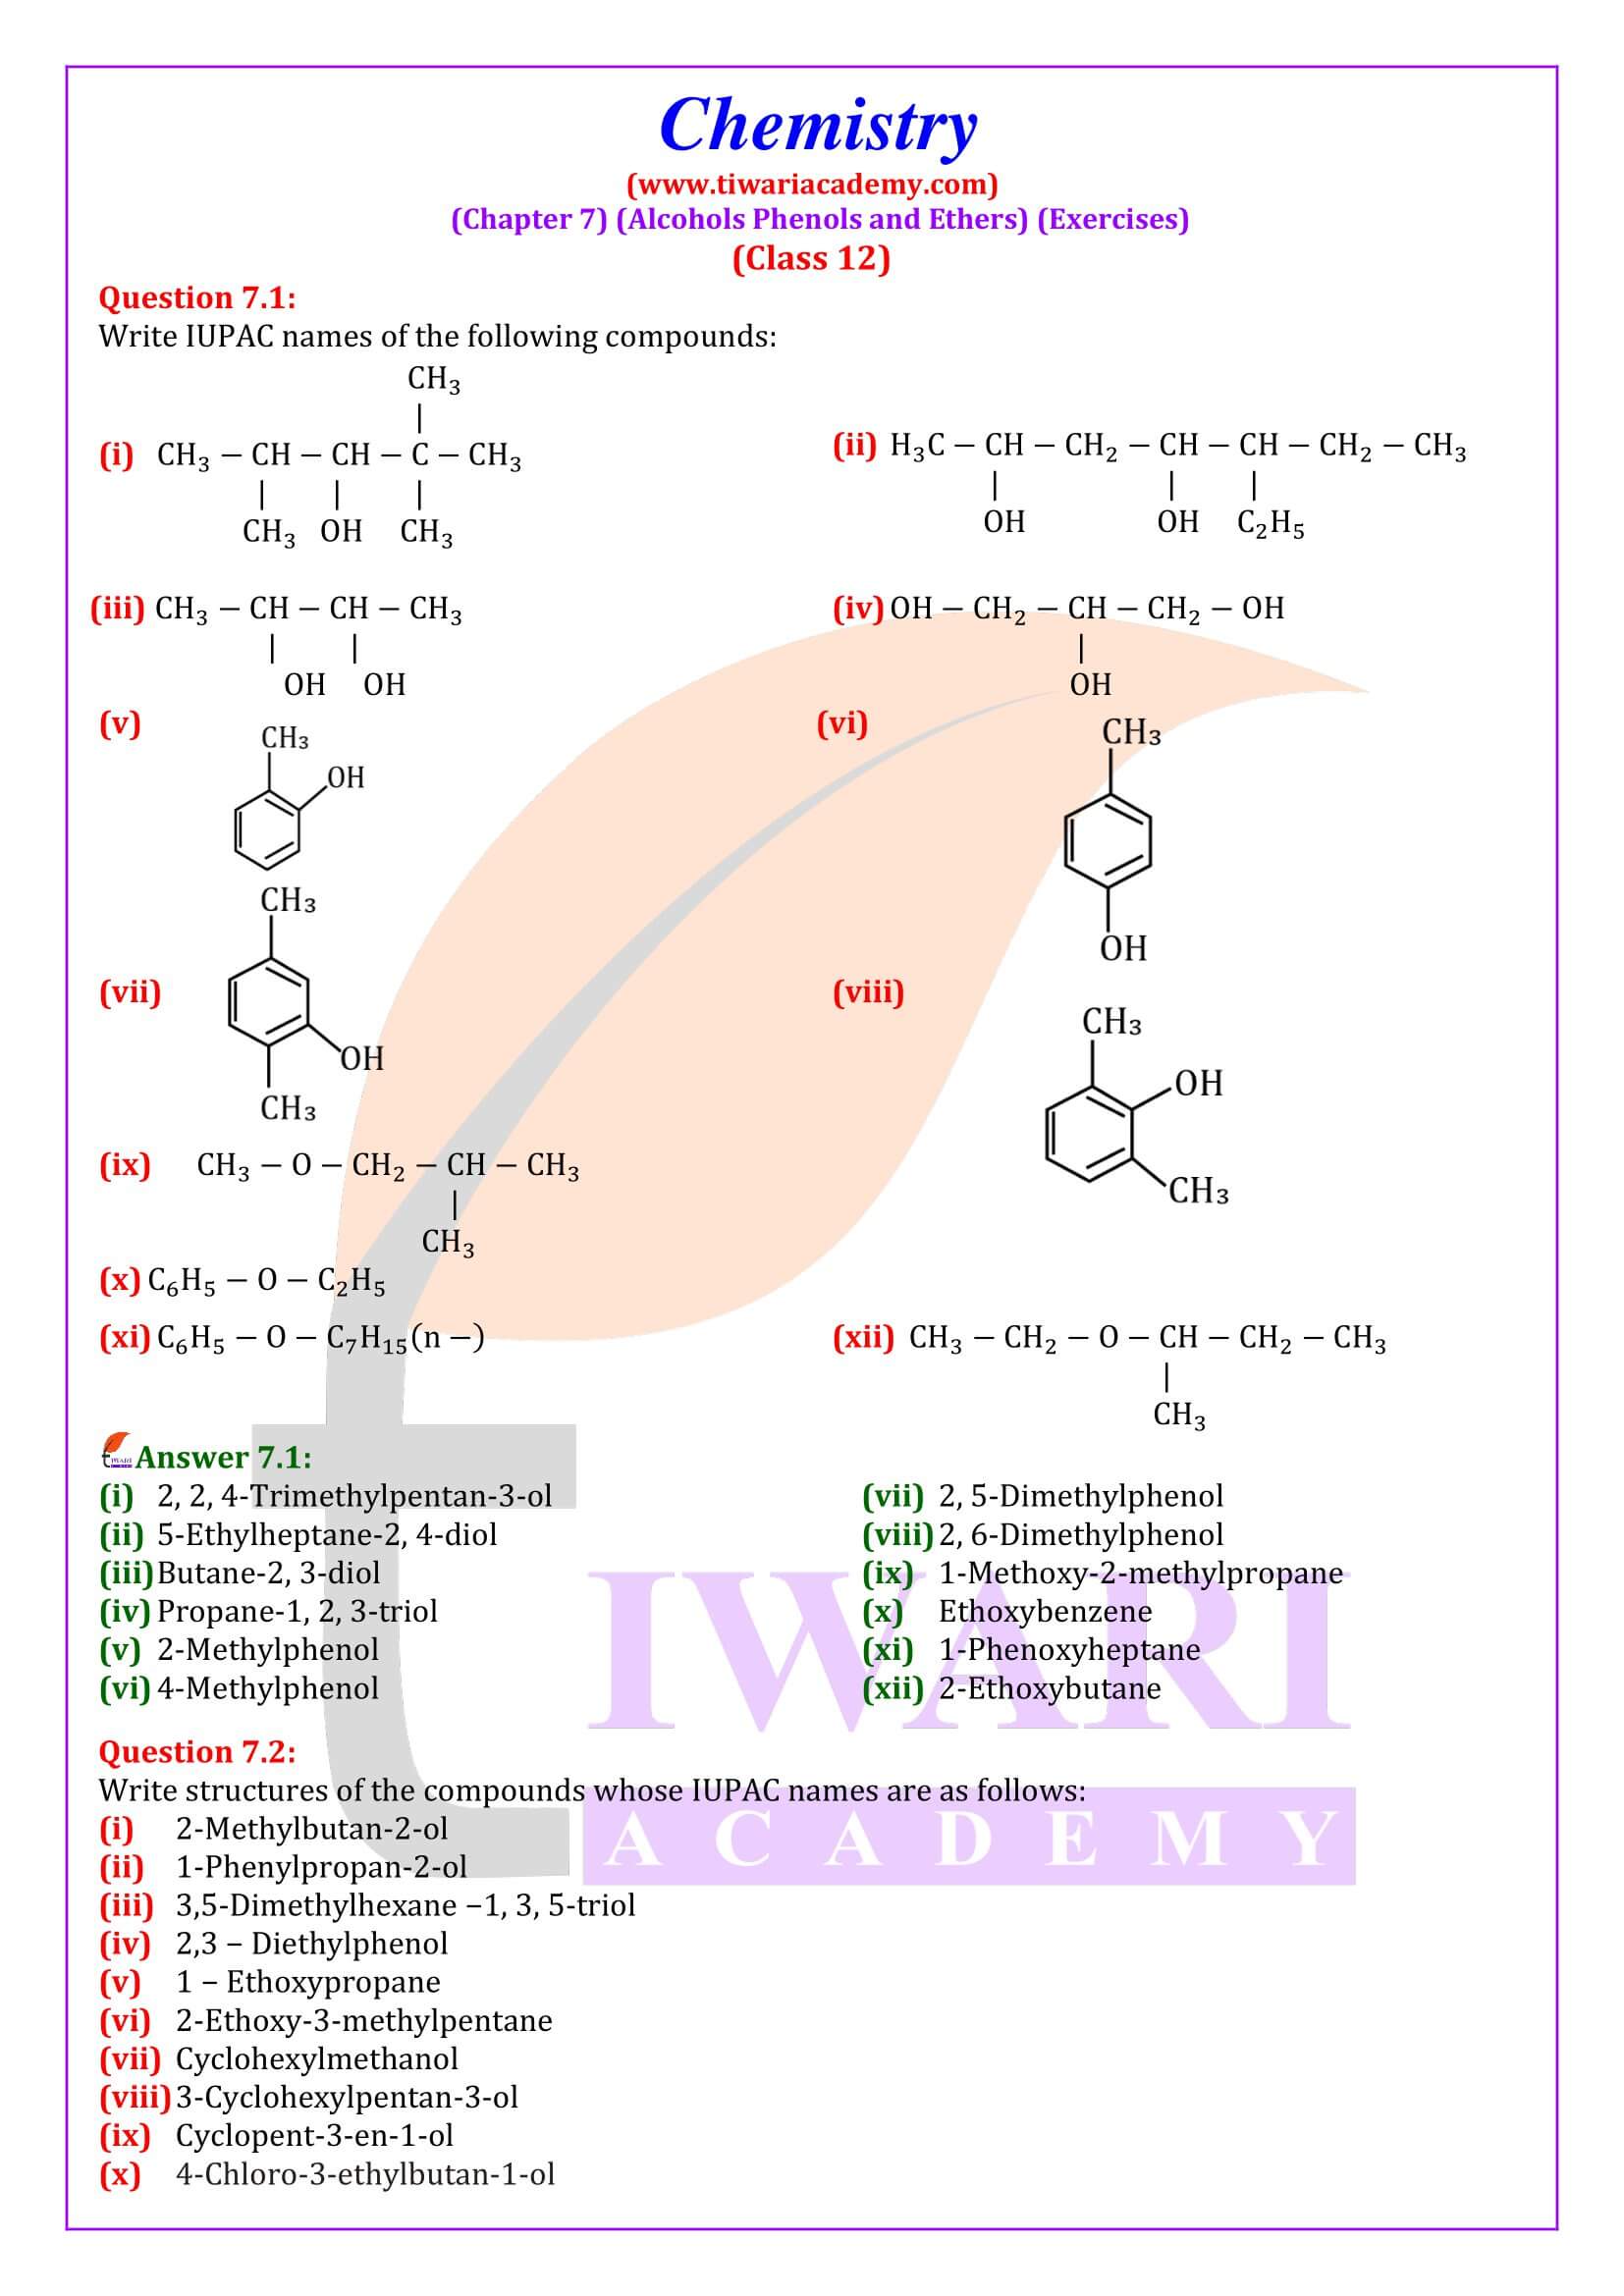 Class 12 Chemistry Chapter 7